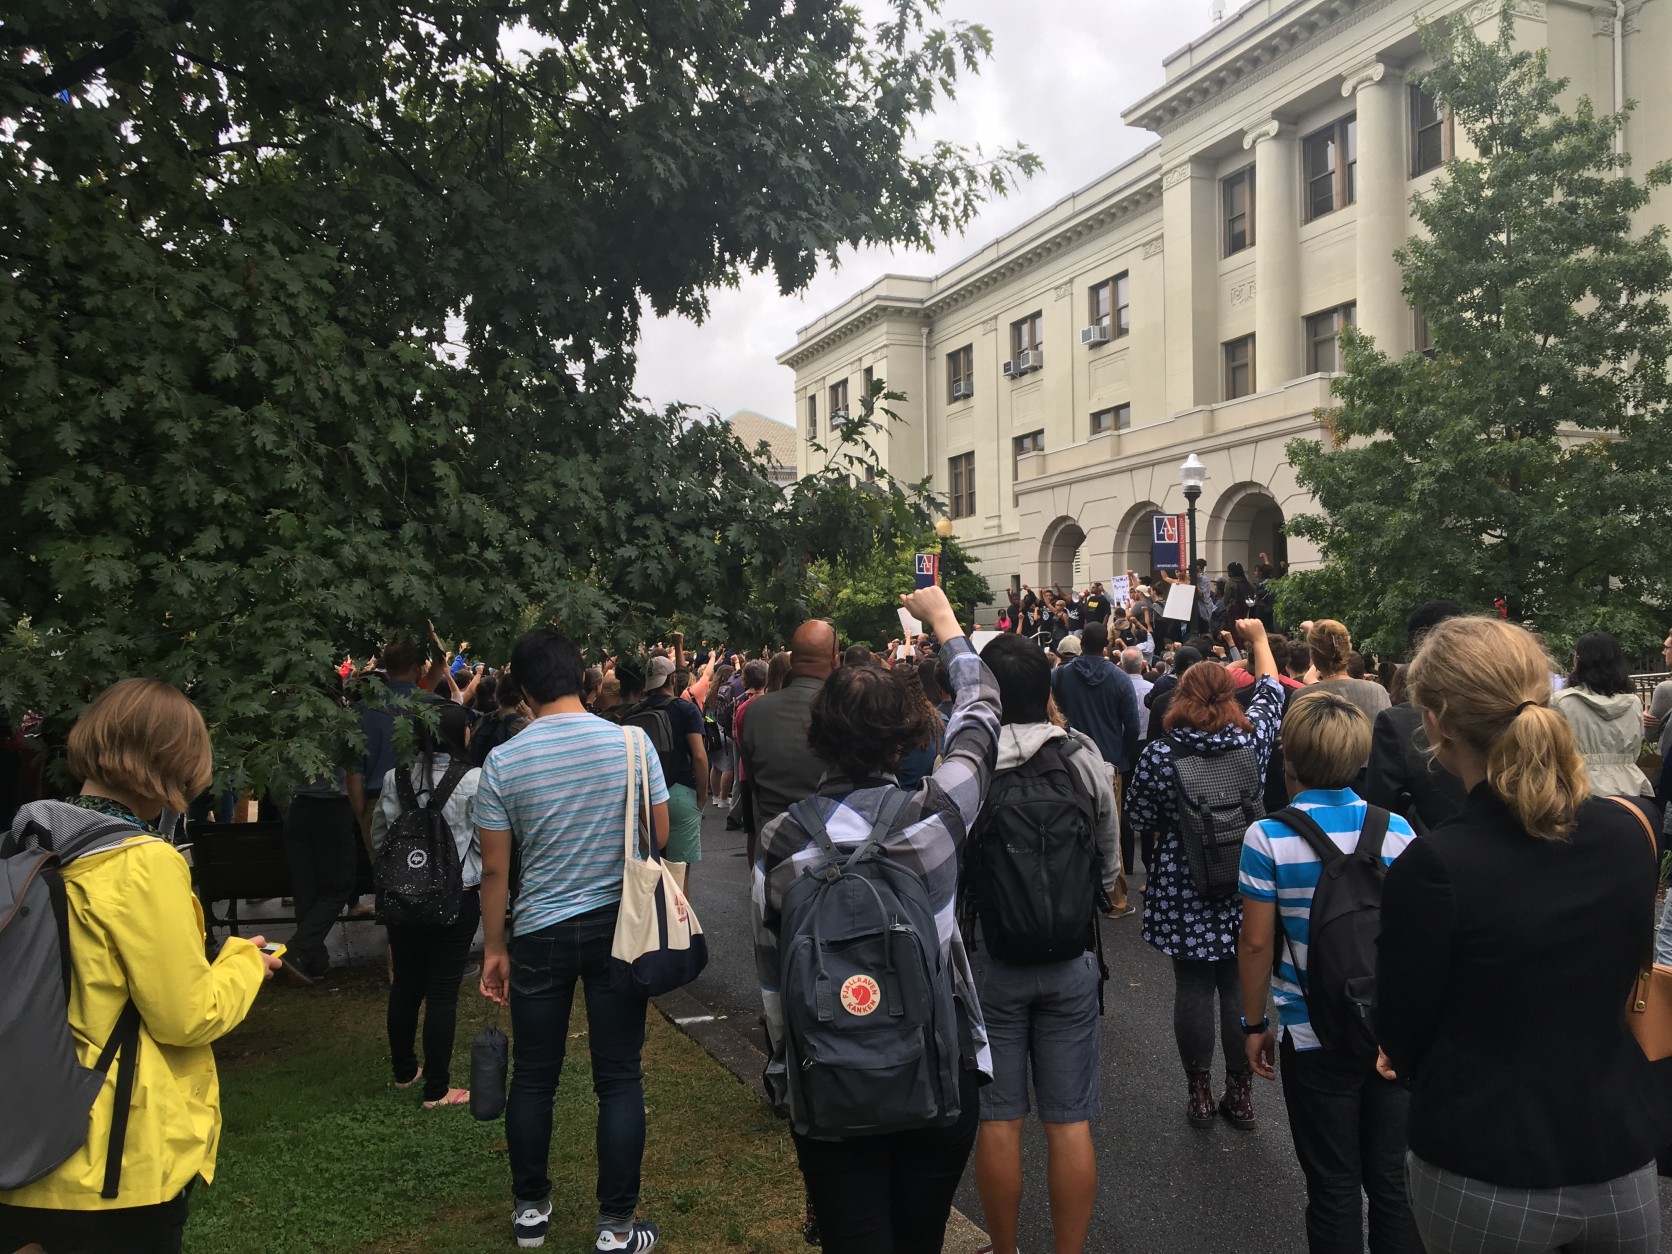 American University students gather at the protest on campus on Monday afternoon after the recent reports of black student harassment. (WTOP/Max Smith)